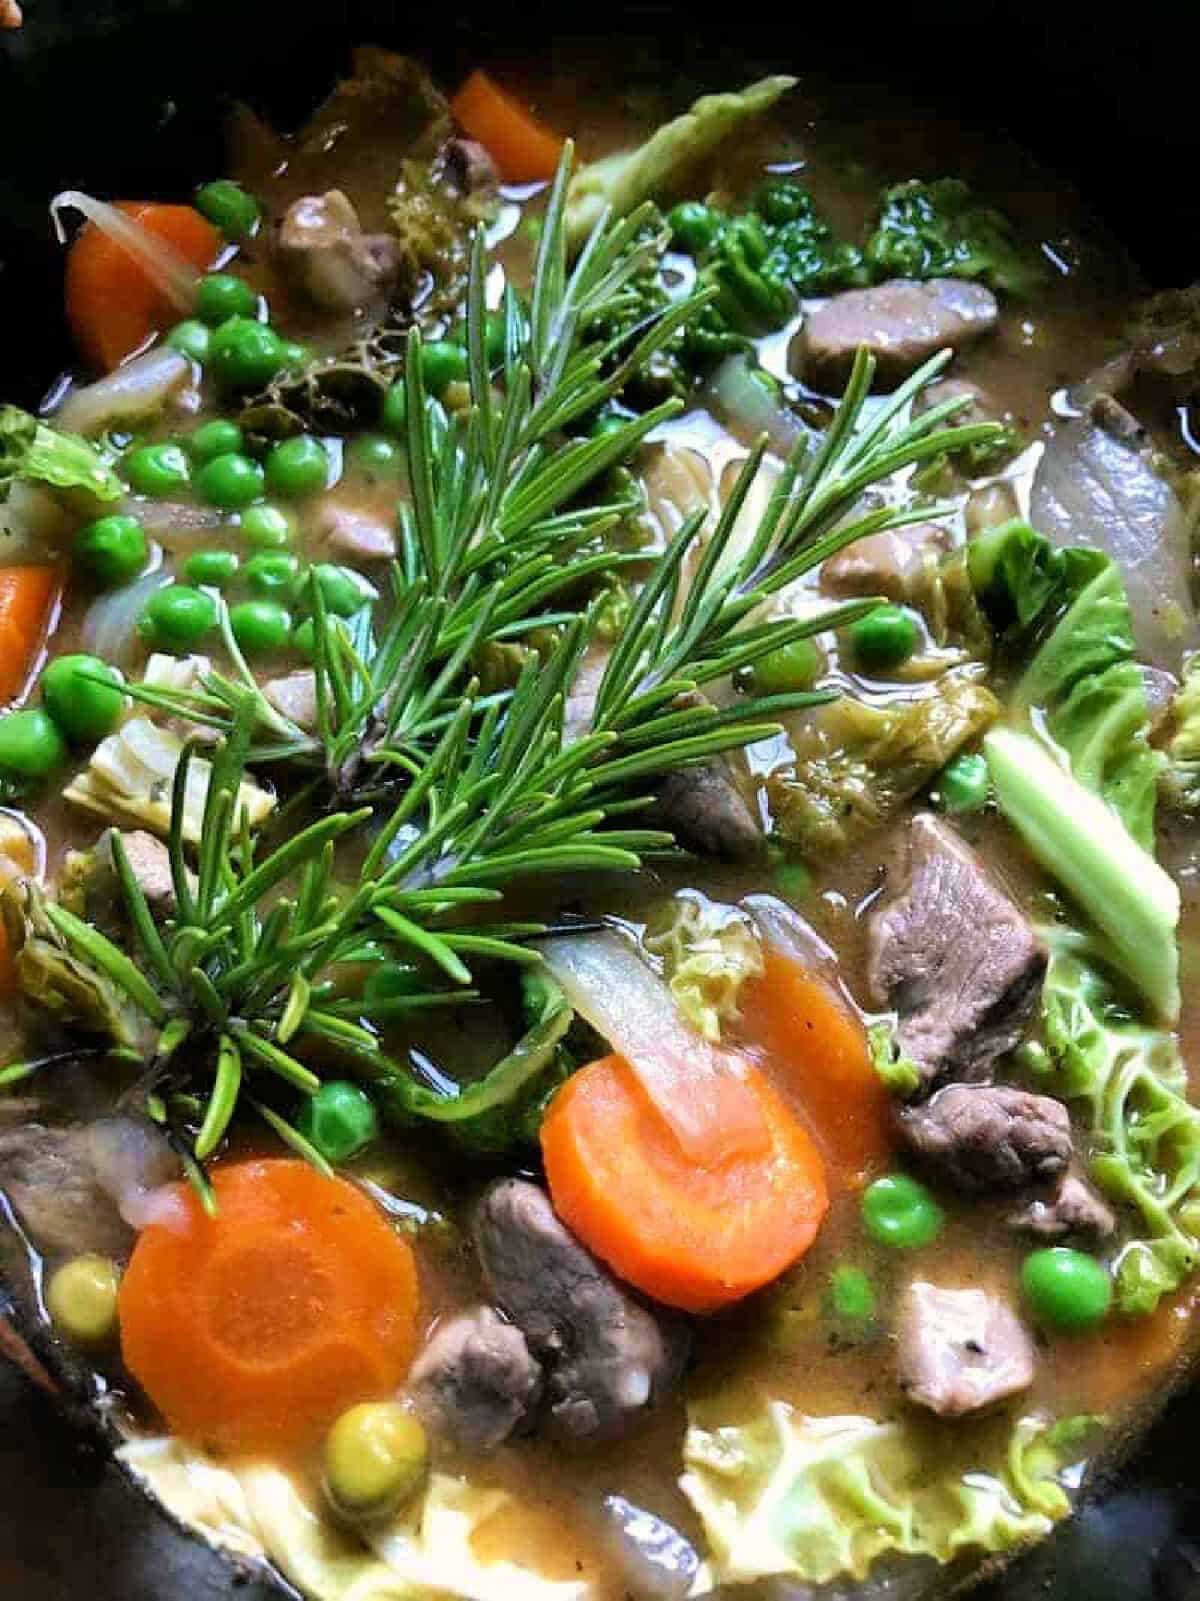 Close up of cooked lamb casserole with peas, carrots, rosemary.